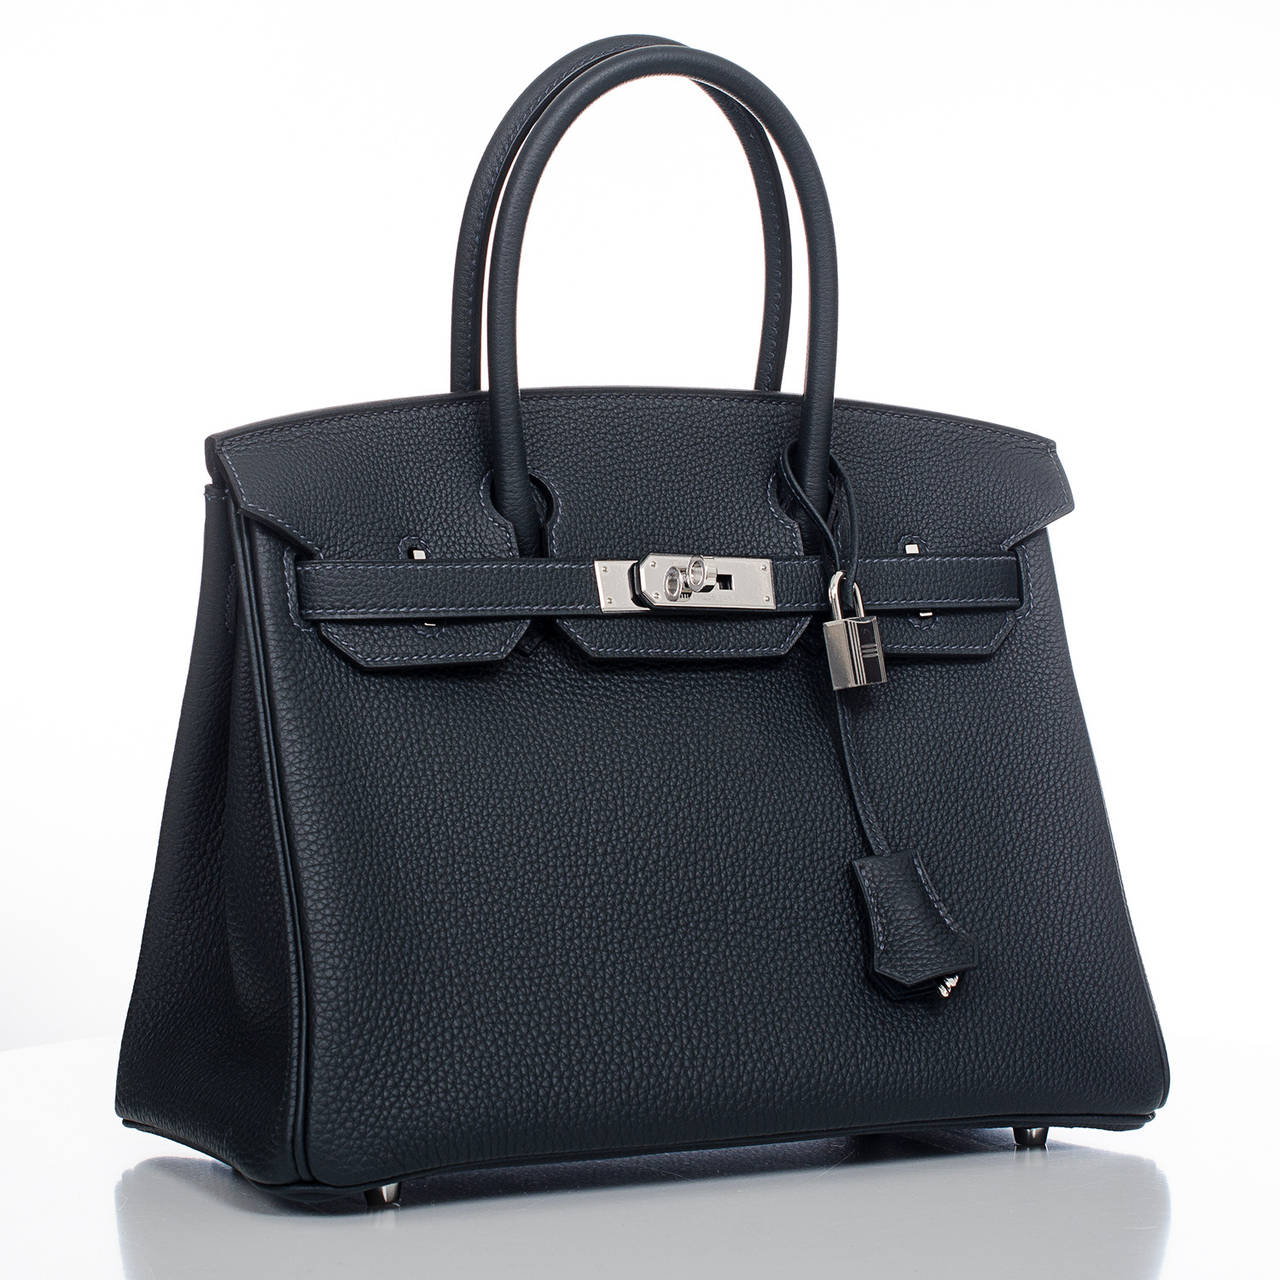 Hermes Blue Ocean Birkin 30cm in togo (bull) leather with palladium hardware.

The Hermes Birkin is the most coveted and the hardest to secure handbag in the world. Immediately recognizable by its shape, its thin straps with metal plates on the